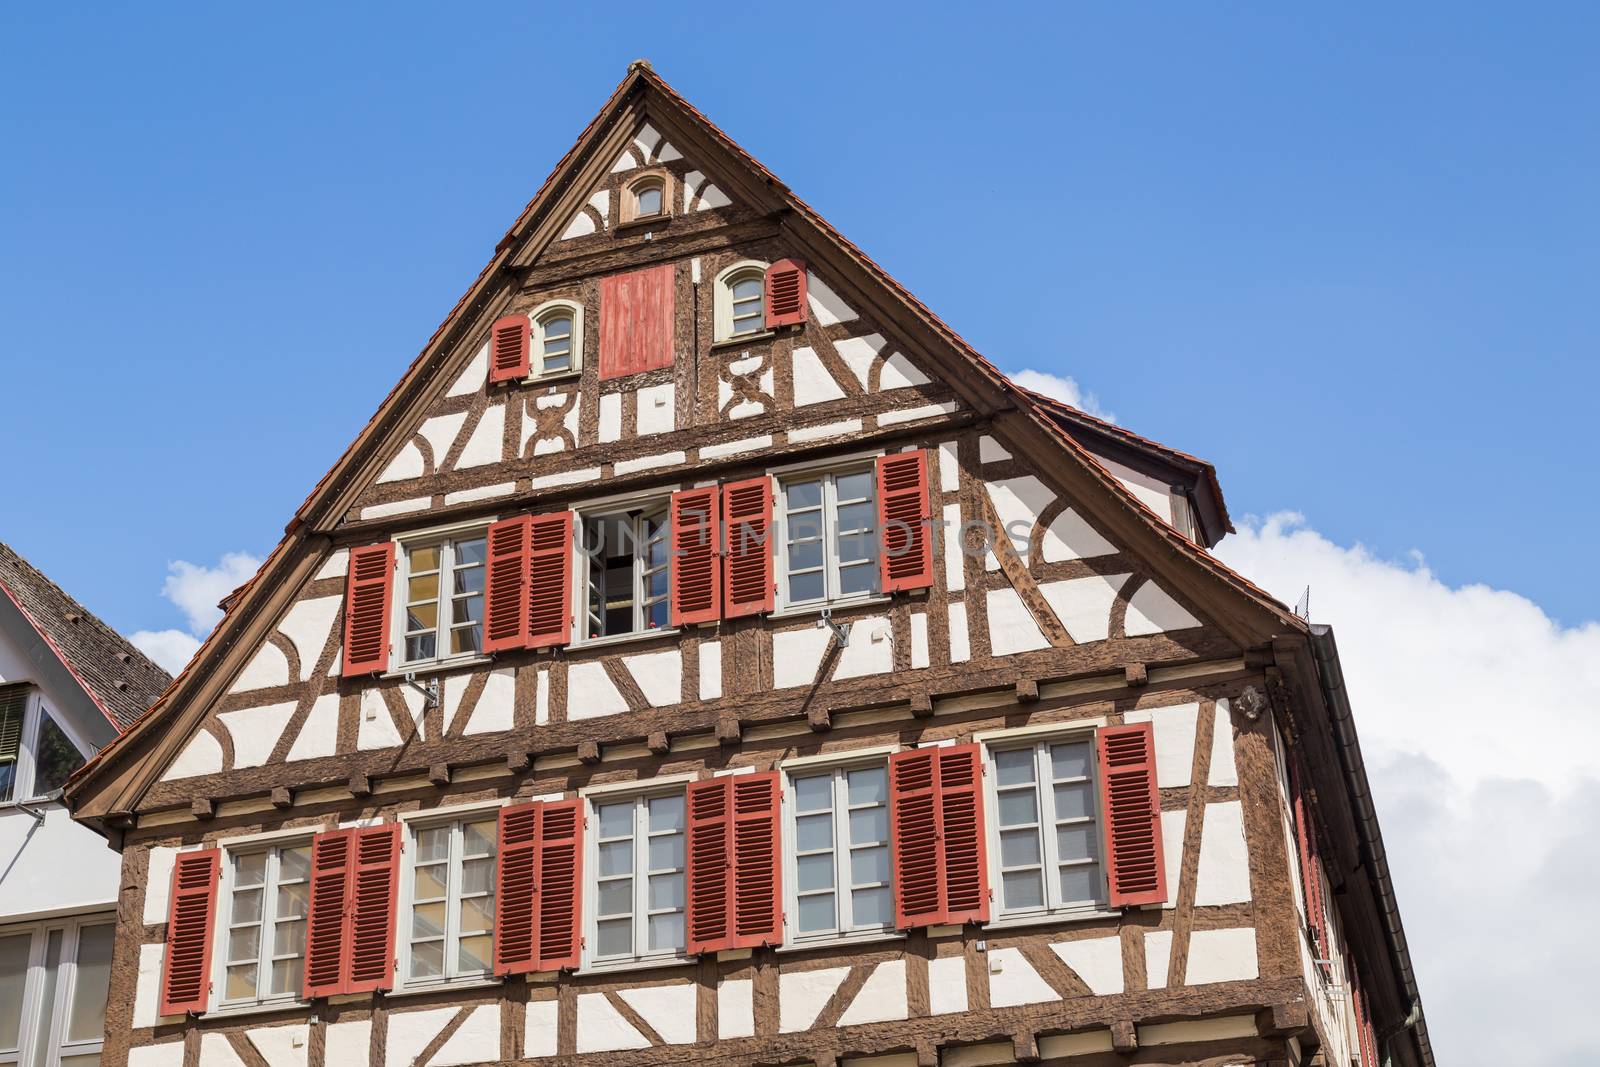 historic half-timbered building made of dark wood with balconies and decorative elements. Tubingen, Baden-Wurttemberg, Germany.